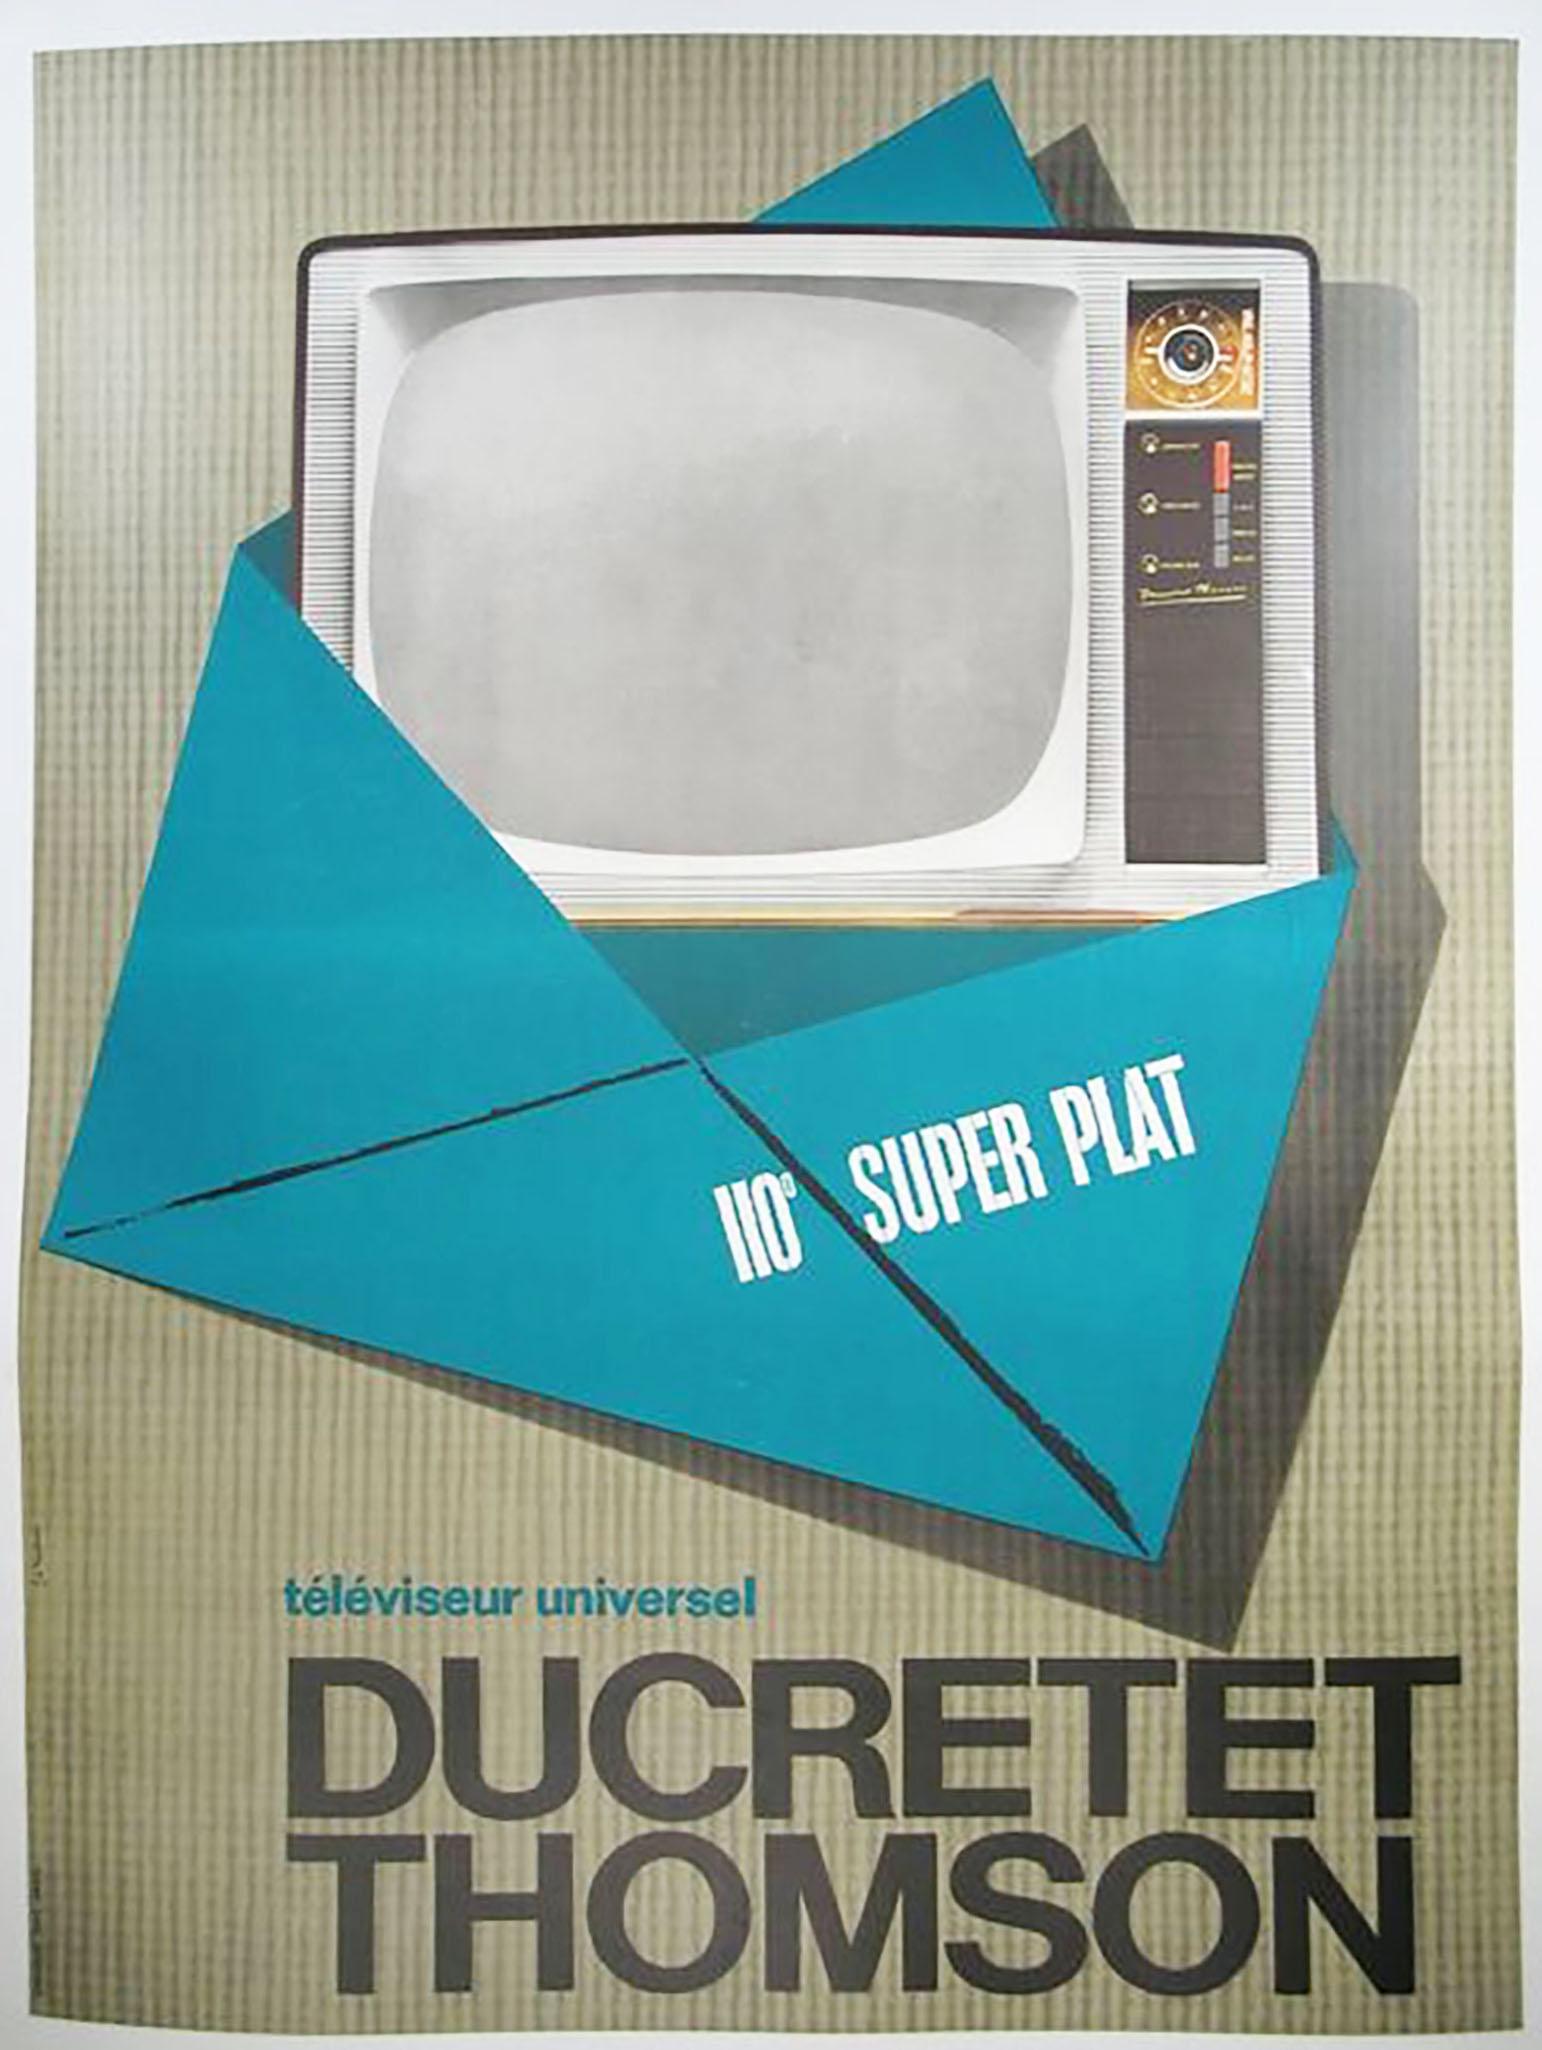 Ducretet Thomson advertising poster
1960
France
poster designed by Jc. Rousseau 
dimensions : H 158 cm x W 118 cm
price: 790 € (€).